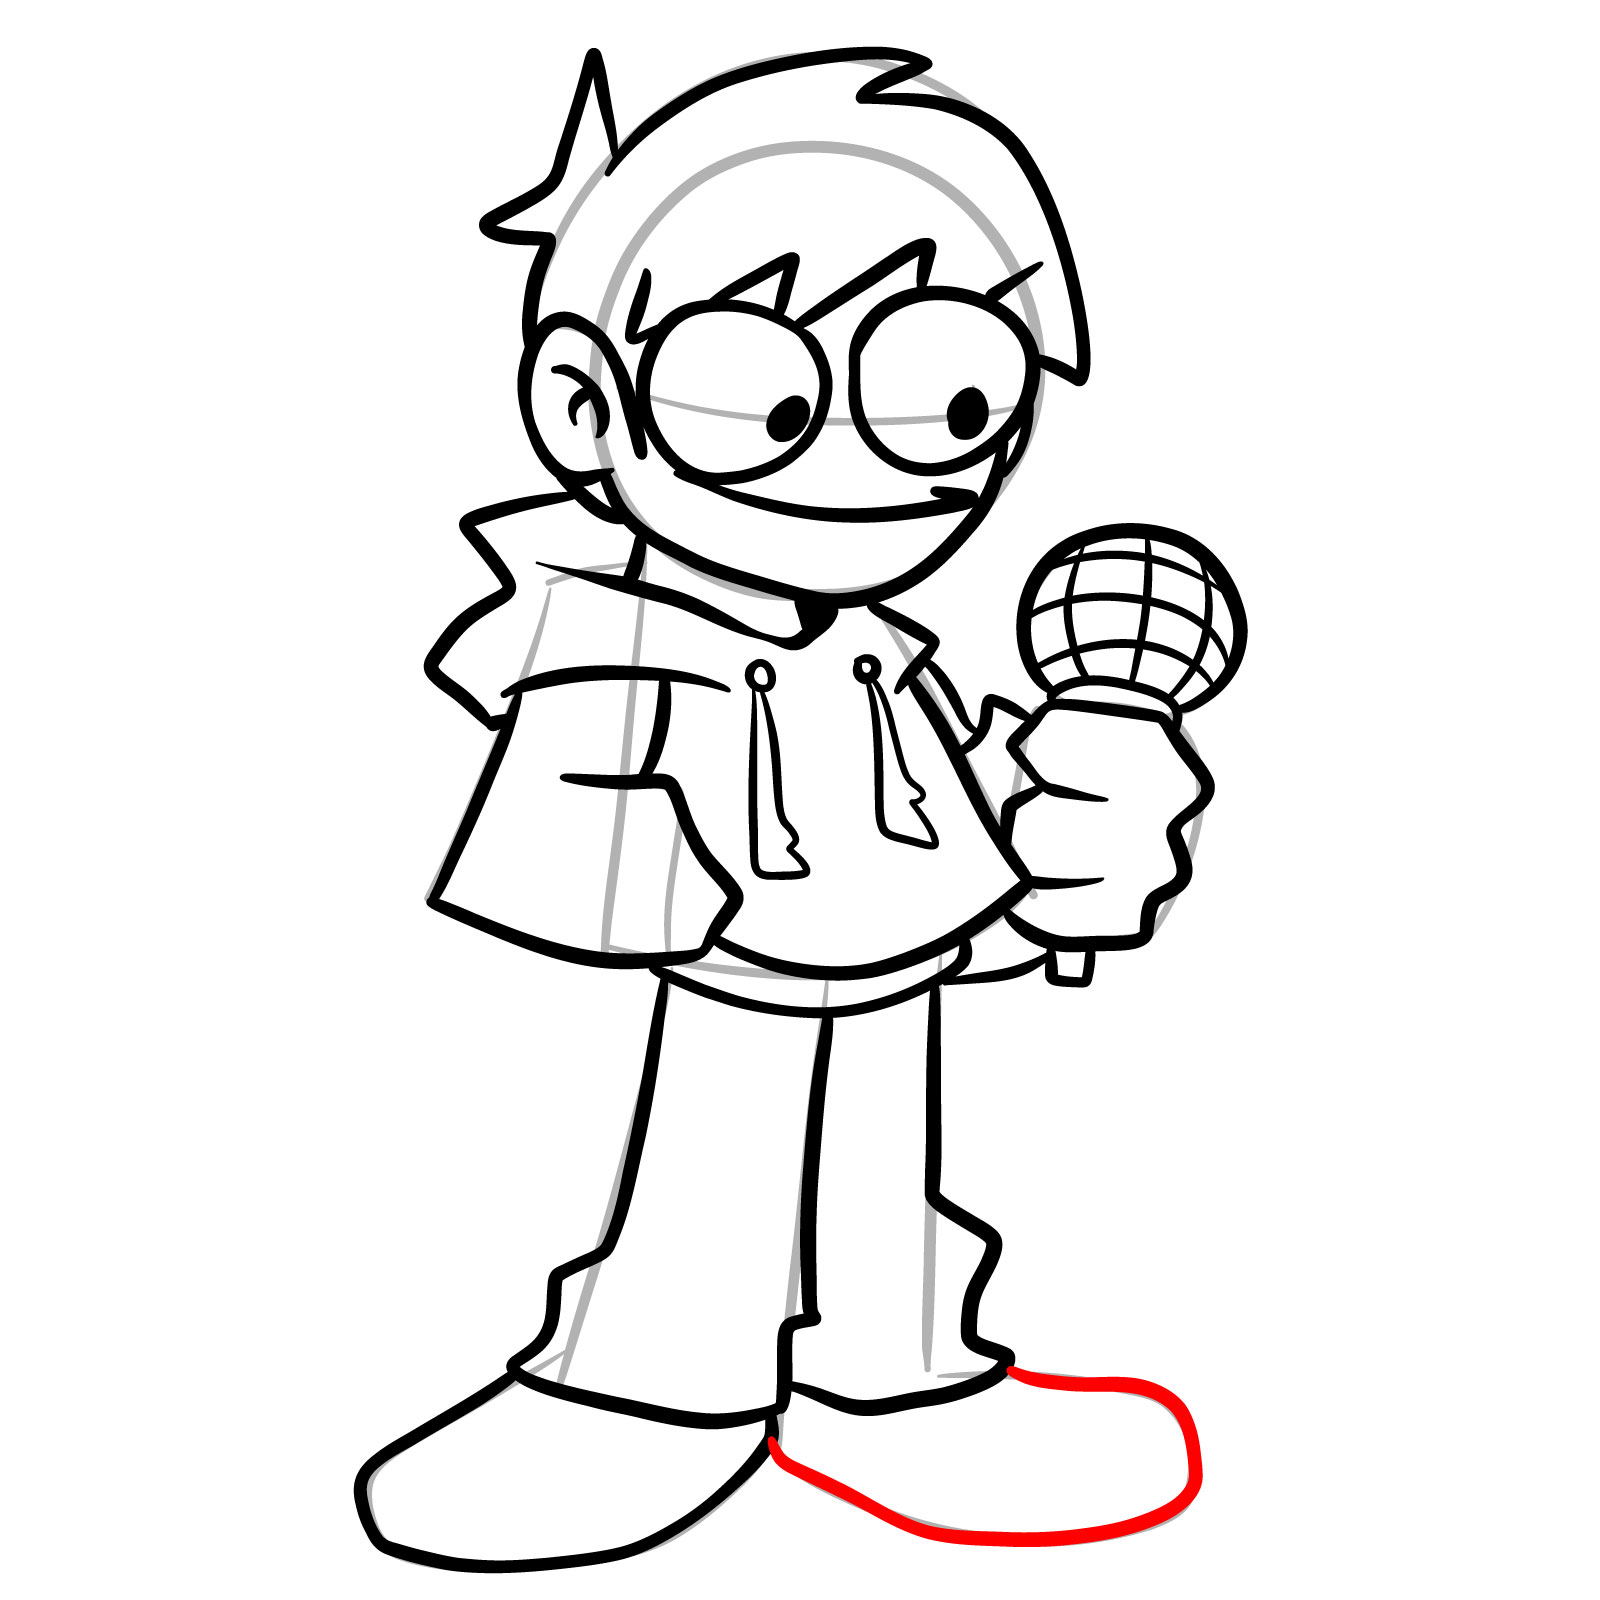 How to draw Edd from Online Vs - step 25